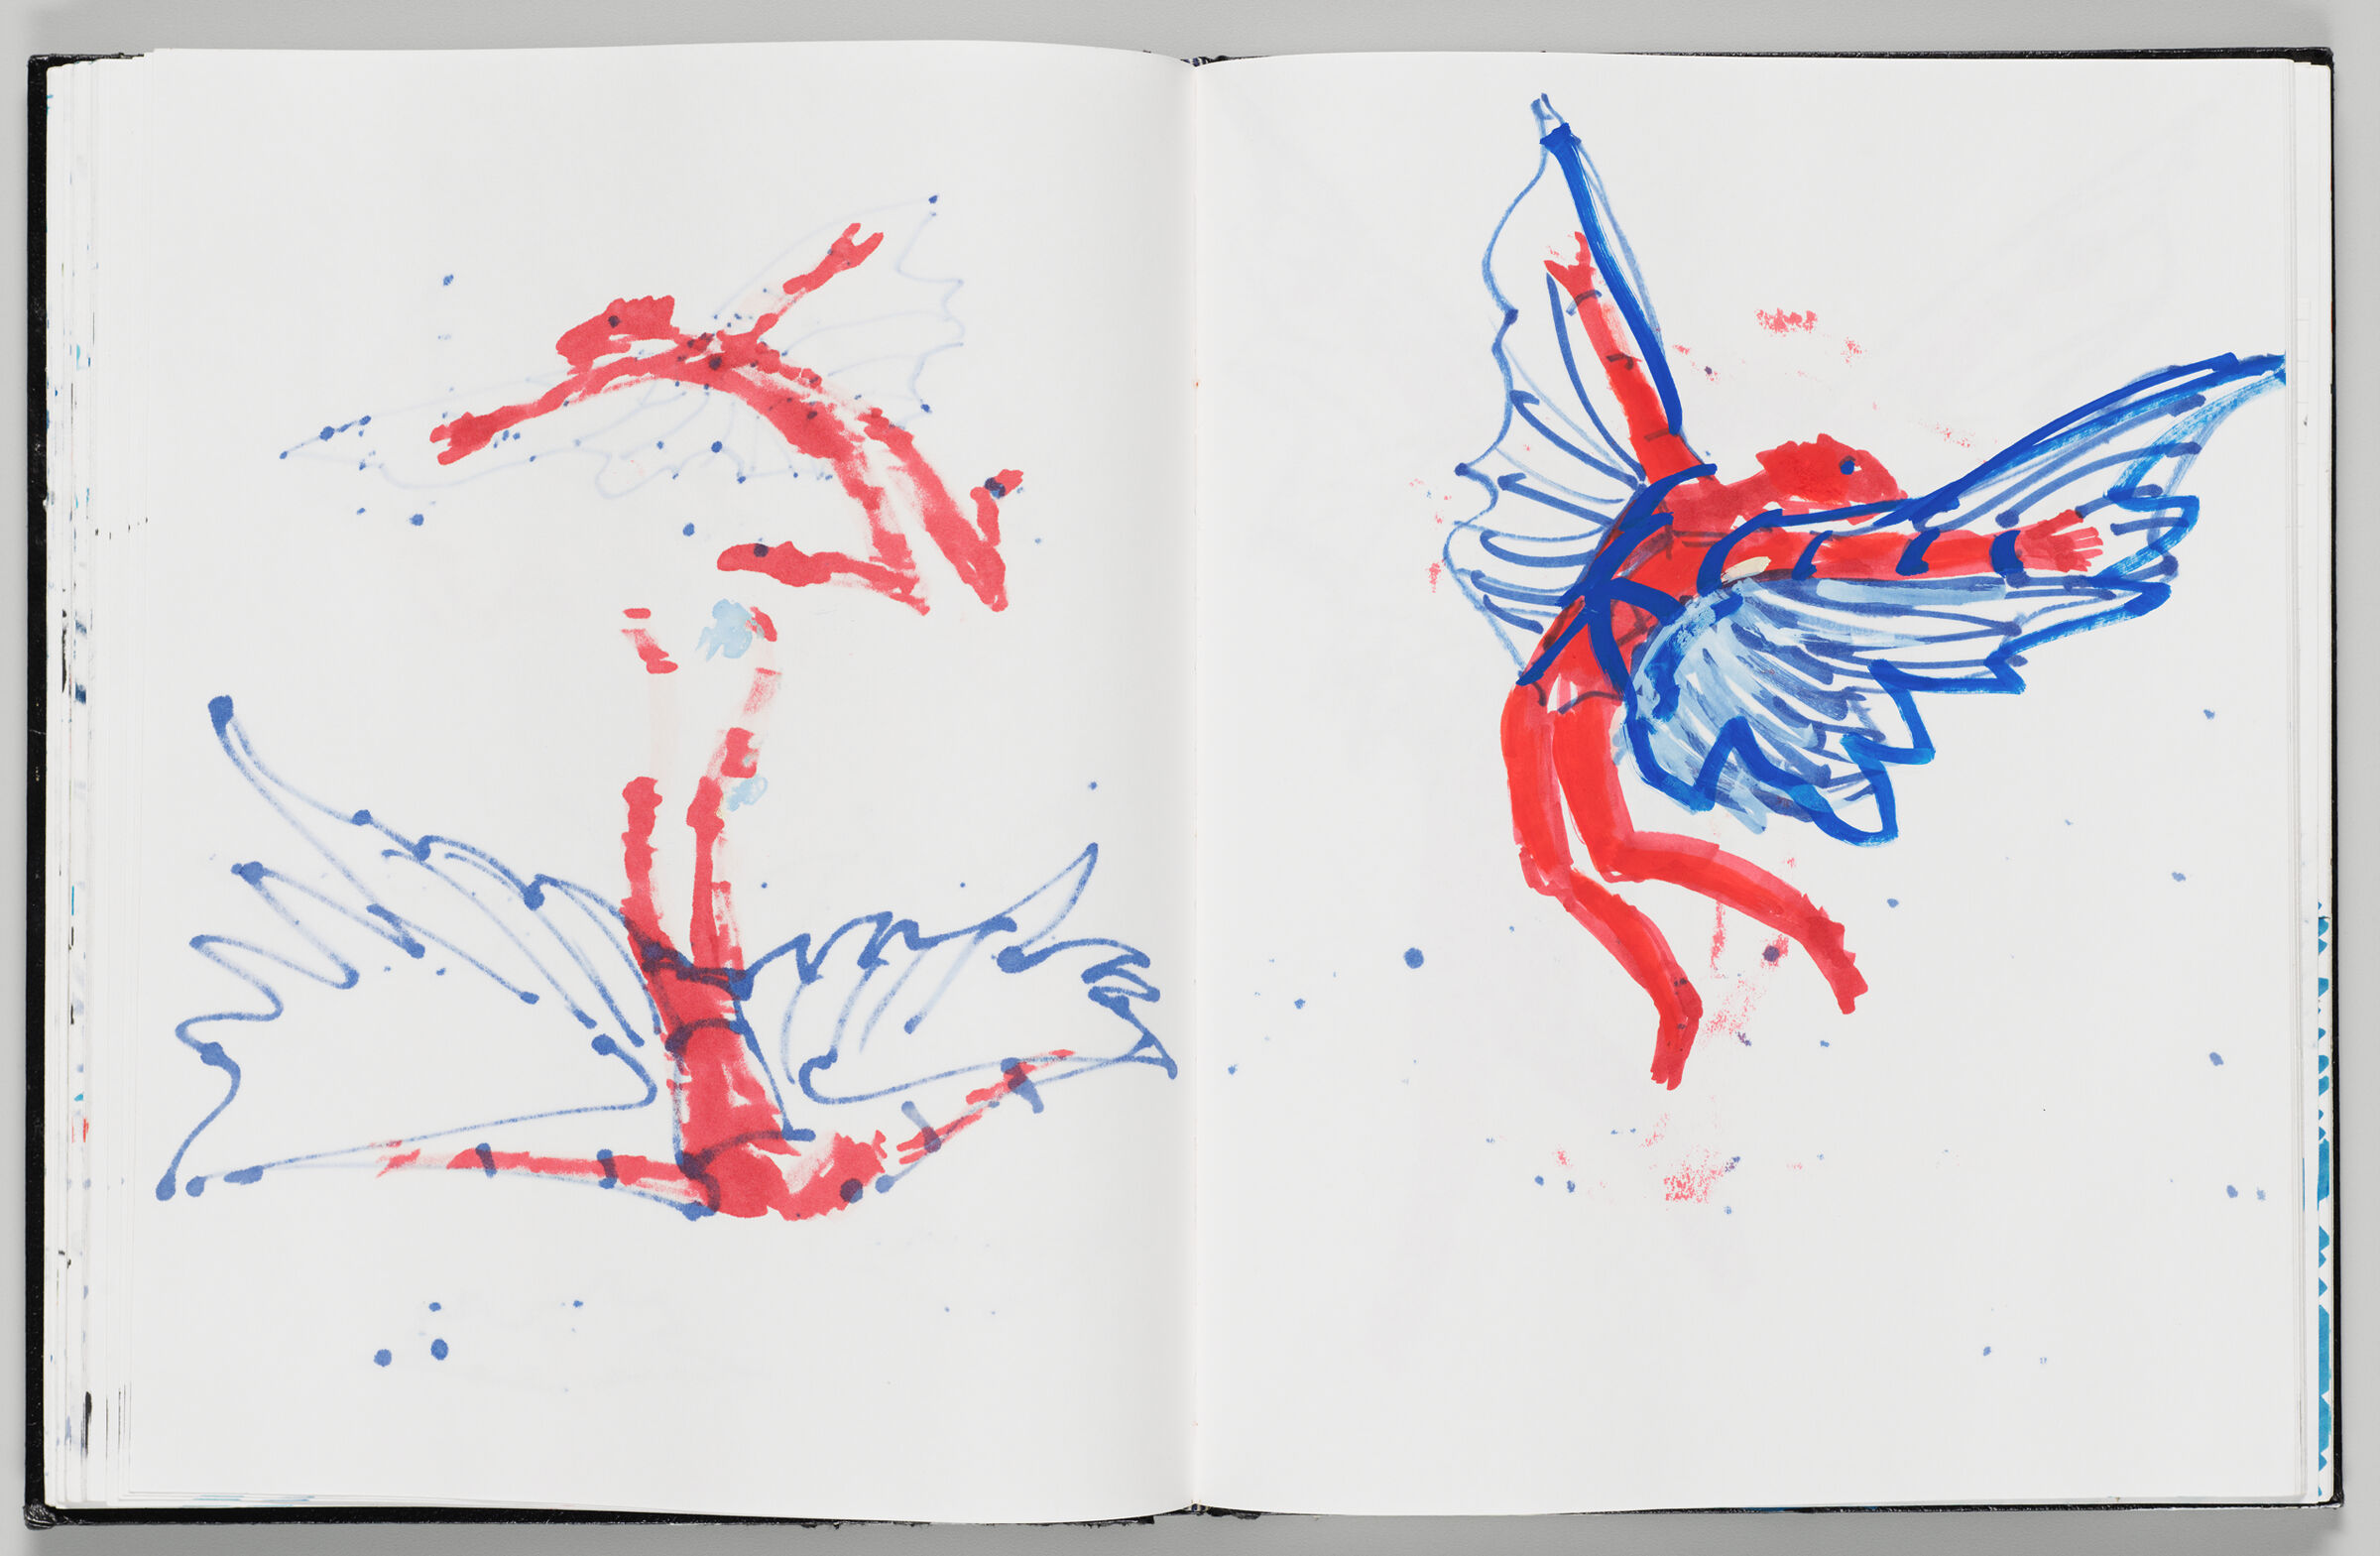 Untitled (Bleed-Through Of Previous Page With Color Transfer, Left Page); Untitled (Flying Figure With Color Transfer, Right Page)